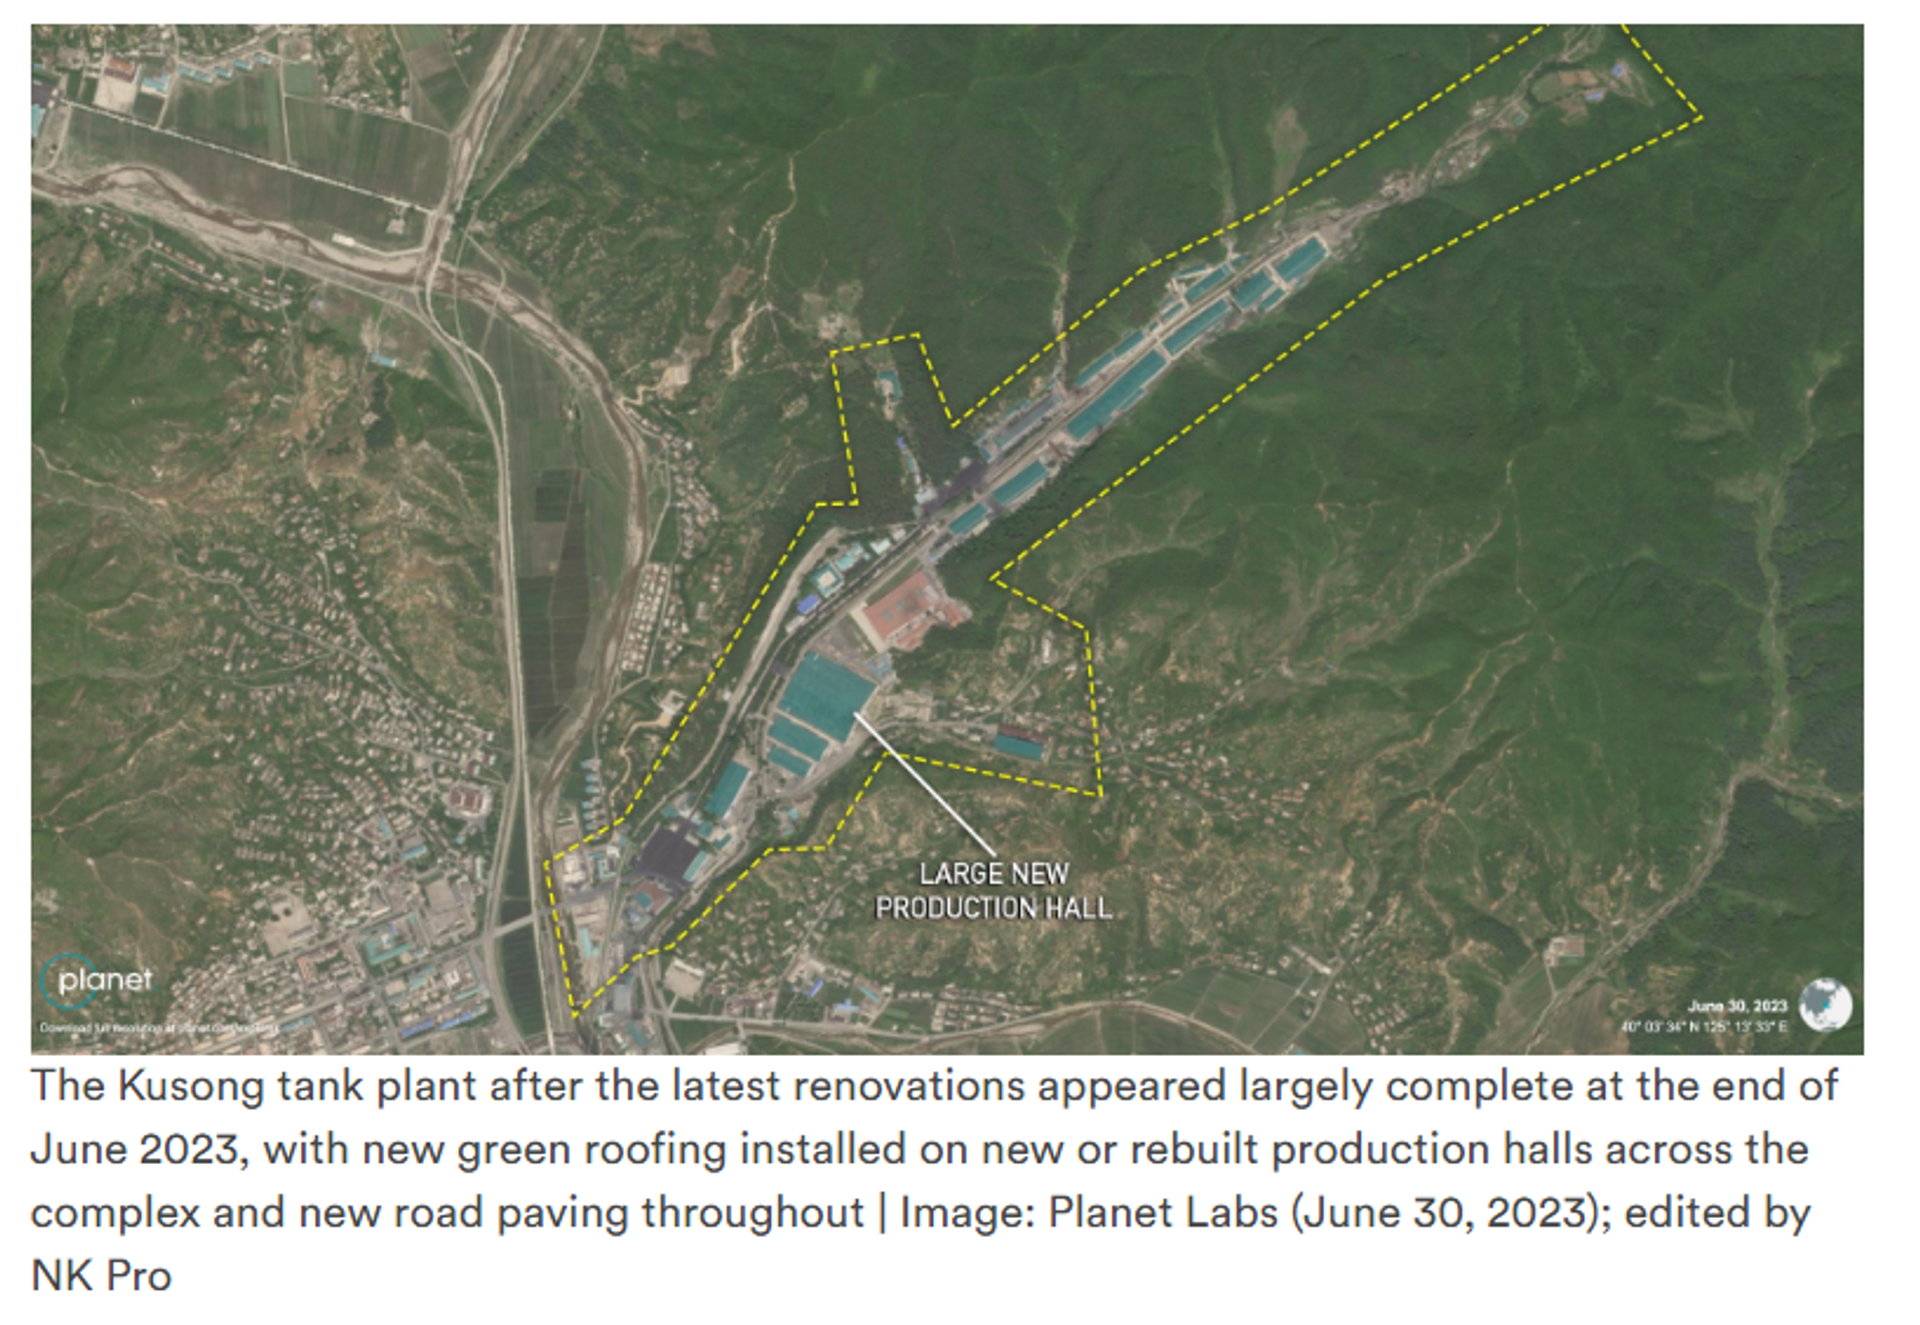 Screengrab appearing to show the Kusong tank plant in North Korea after latest renovations according to an image taken by Planet Labs dated June 30, 2023, and edited by NK Pro. - Sputnik International, 1920, 08.08.2023